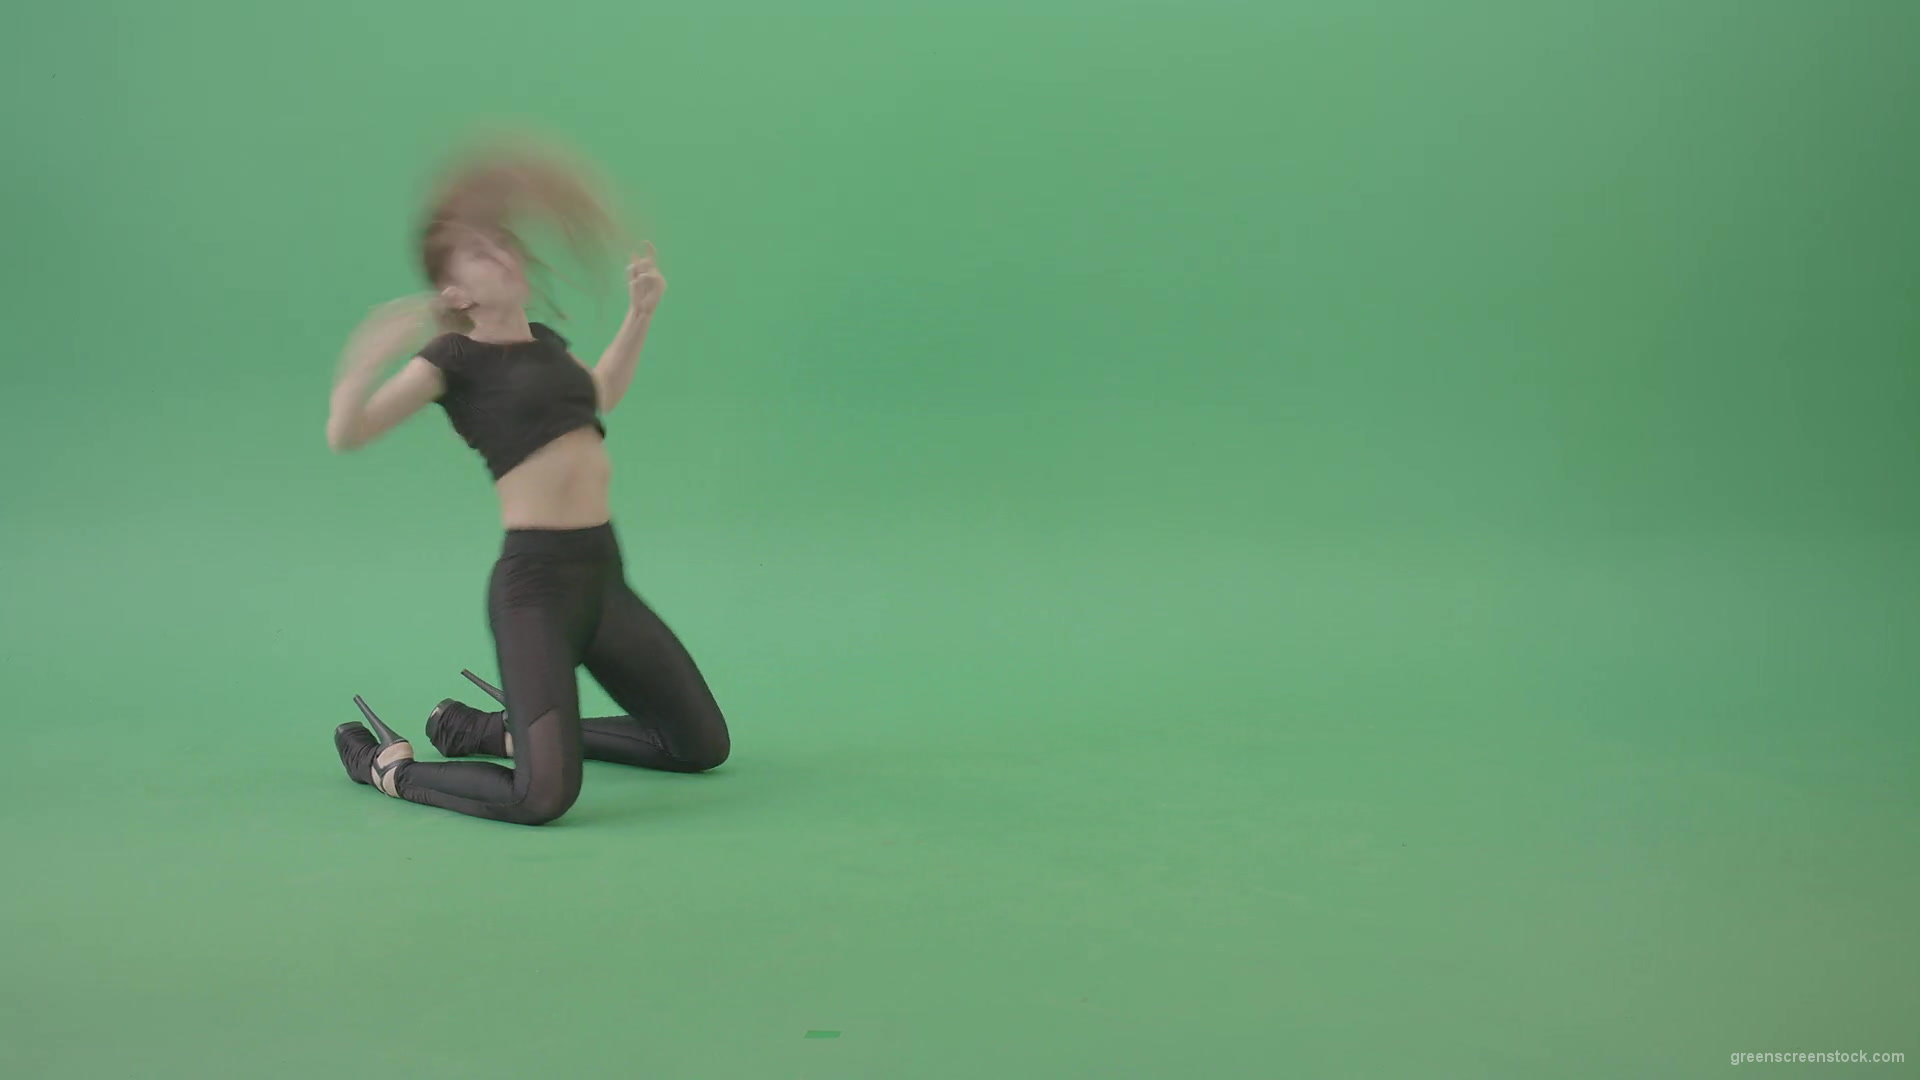 Sexy-Dancing-Girl-showing-Exotic-erotic-dance-isolated-on-green-screen-4K-Video-Footage-1920_006 Green Screen Stock